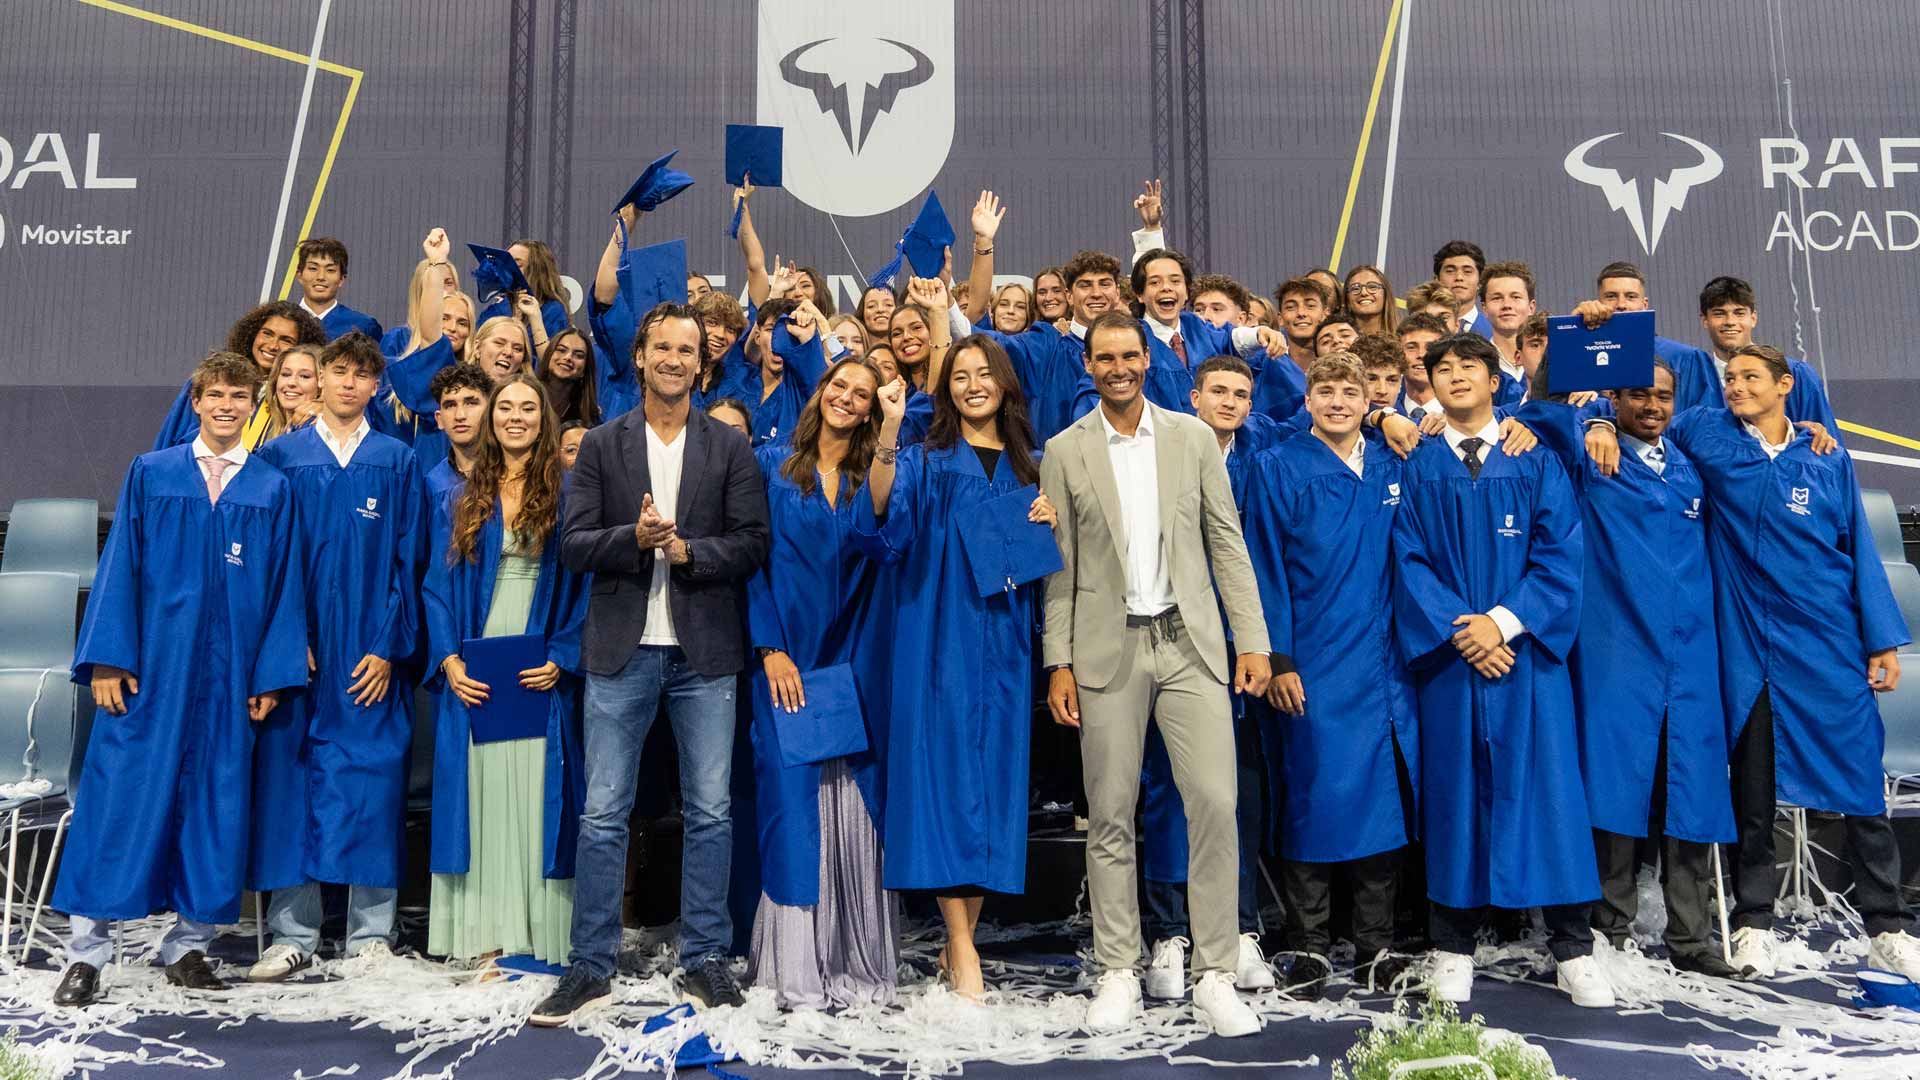 Carlos Moya and Rafael Nadal with the Class of 2024 at the Rafa Nadal Academy by Movistar.